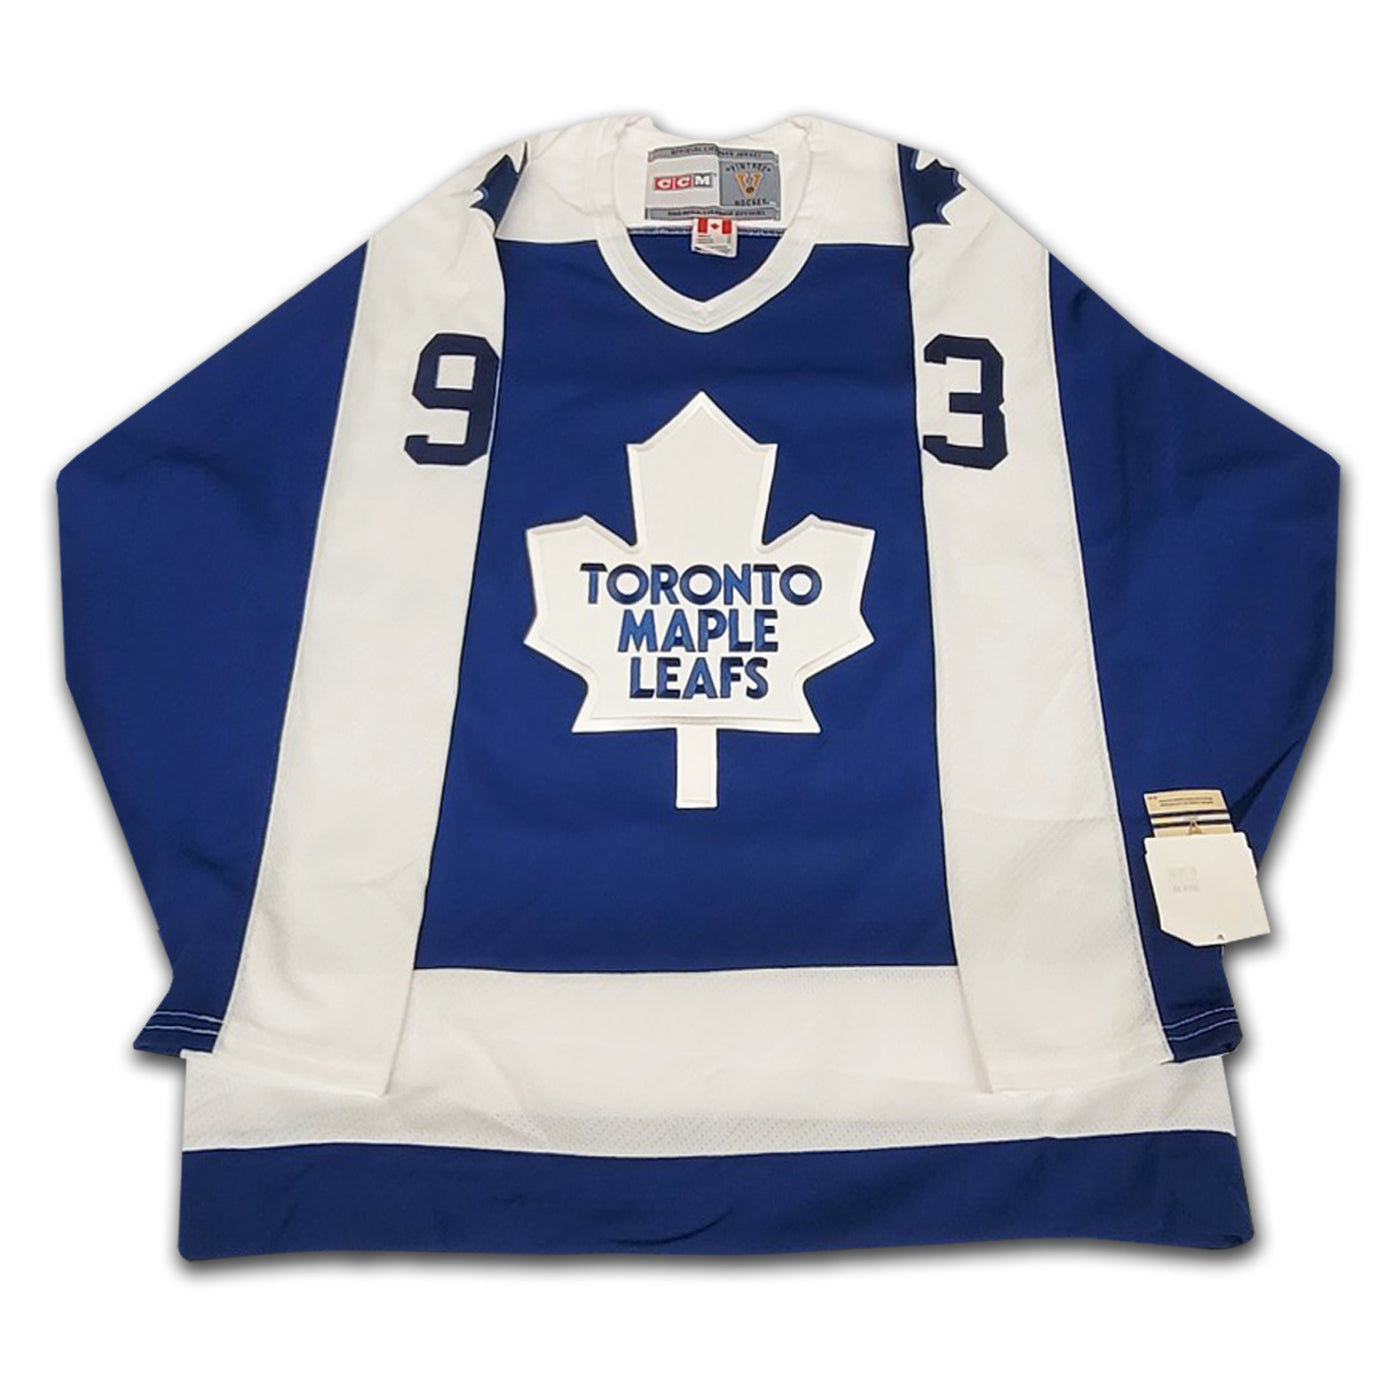 Doug Gilmour Rookie Year Toronto Maple Leafs Autographed CCM Vintage Hockey Jersey